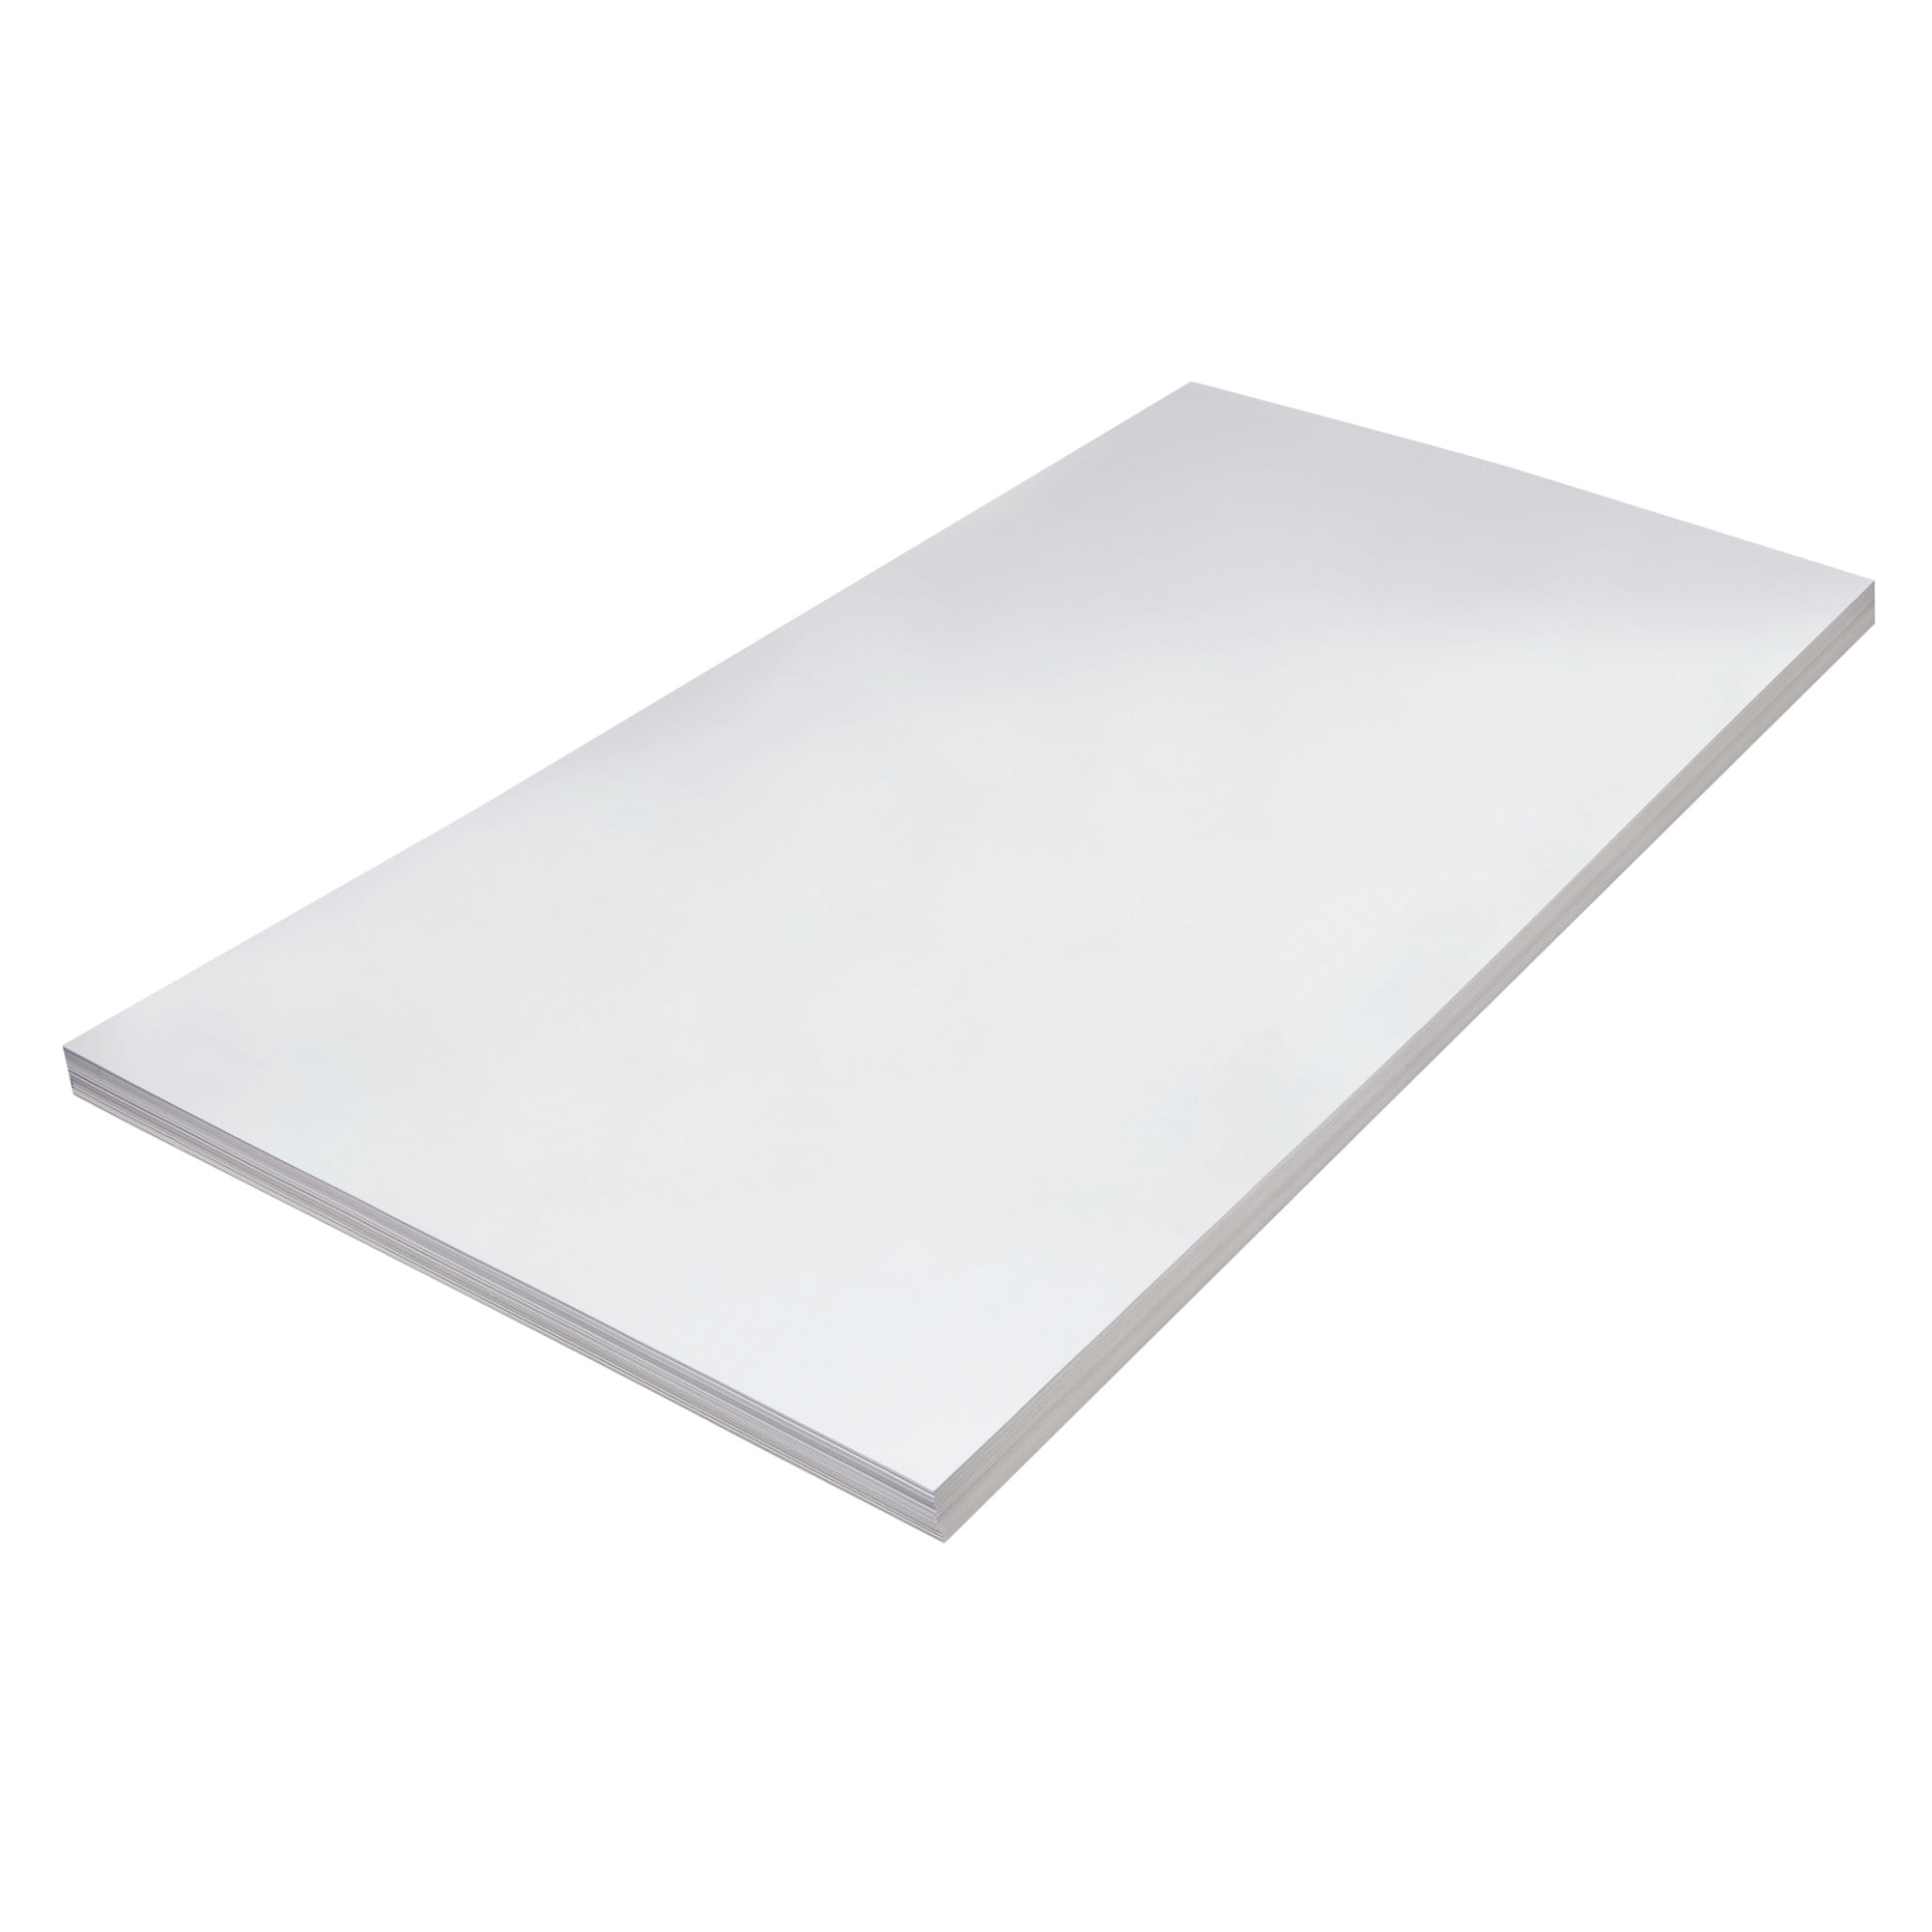 Pacon White Posterboard - 50 Sheets : Target